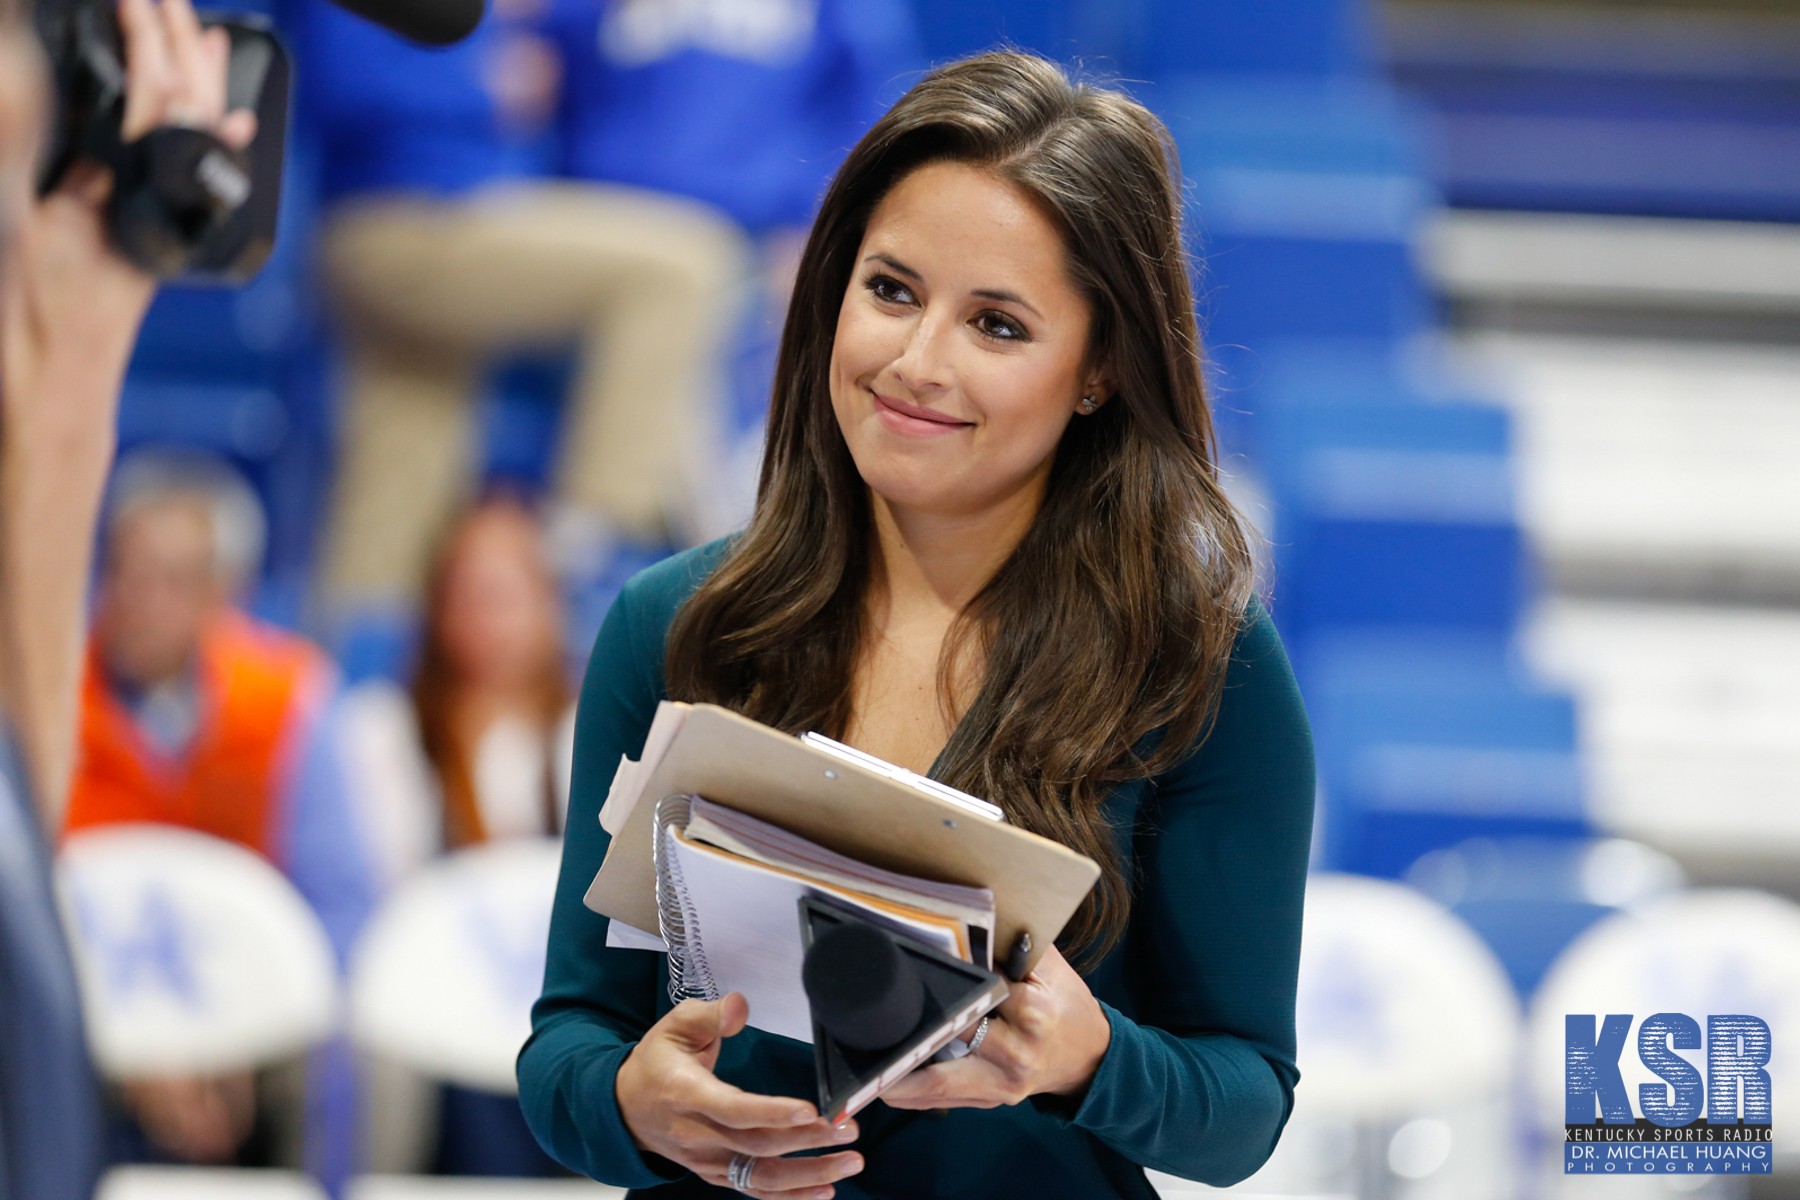 Kaylee Hartung officially says goodbye to ESPN